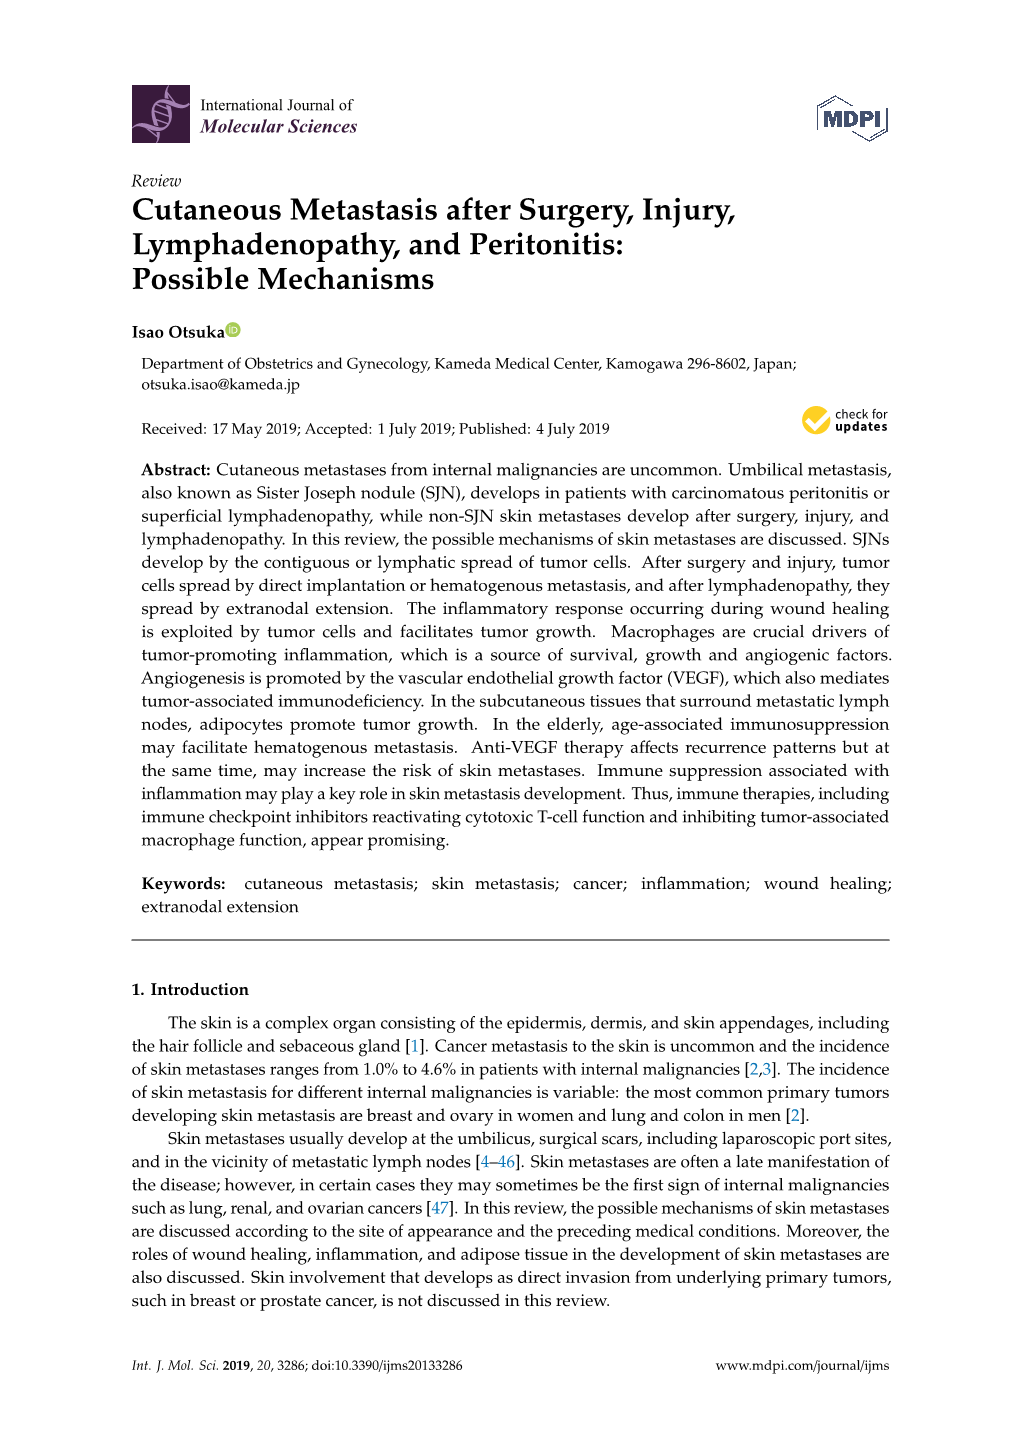 Cutaneous Metastasis After Surgery, Injury, Lymphadenopathy, and Peritonitis: Possible Mechanisms